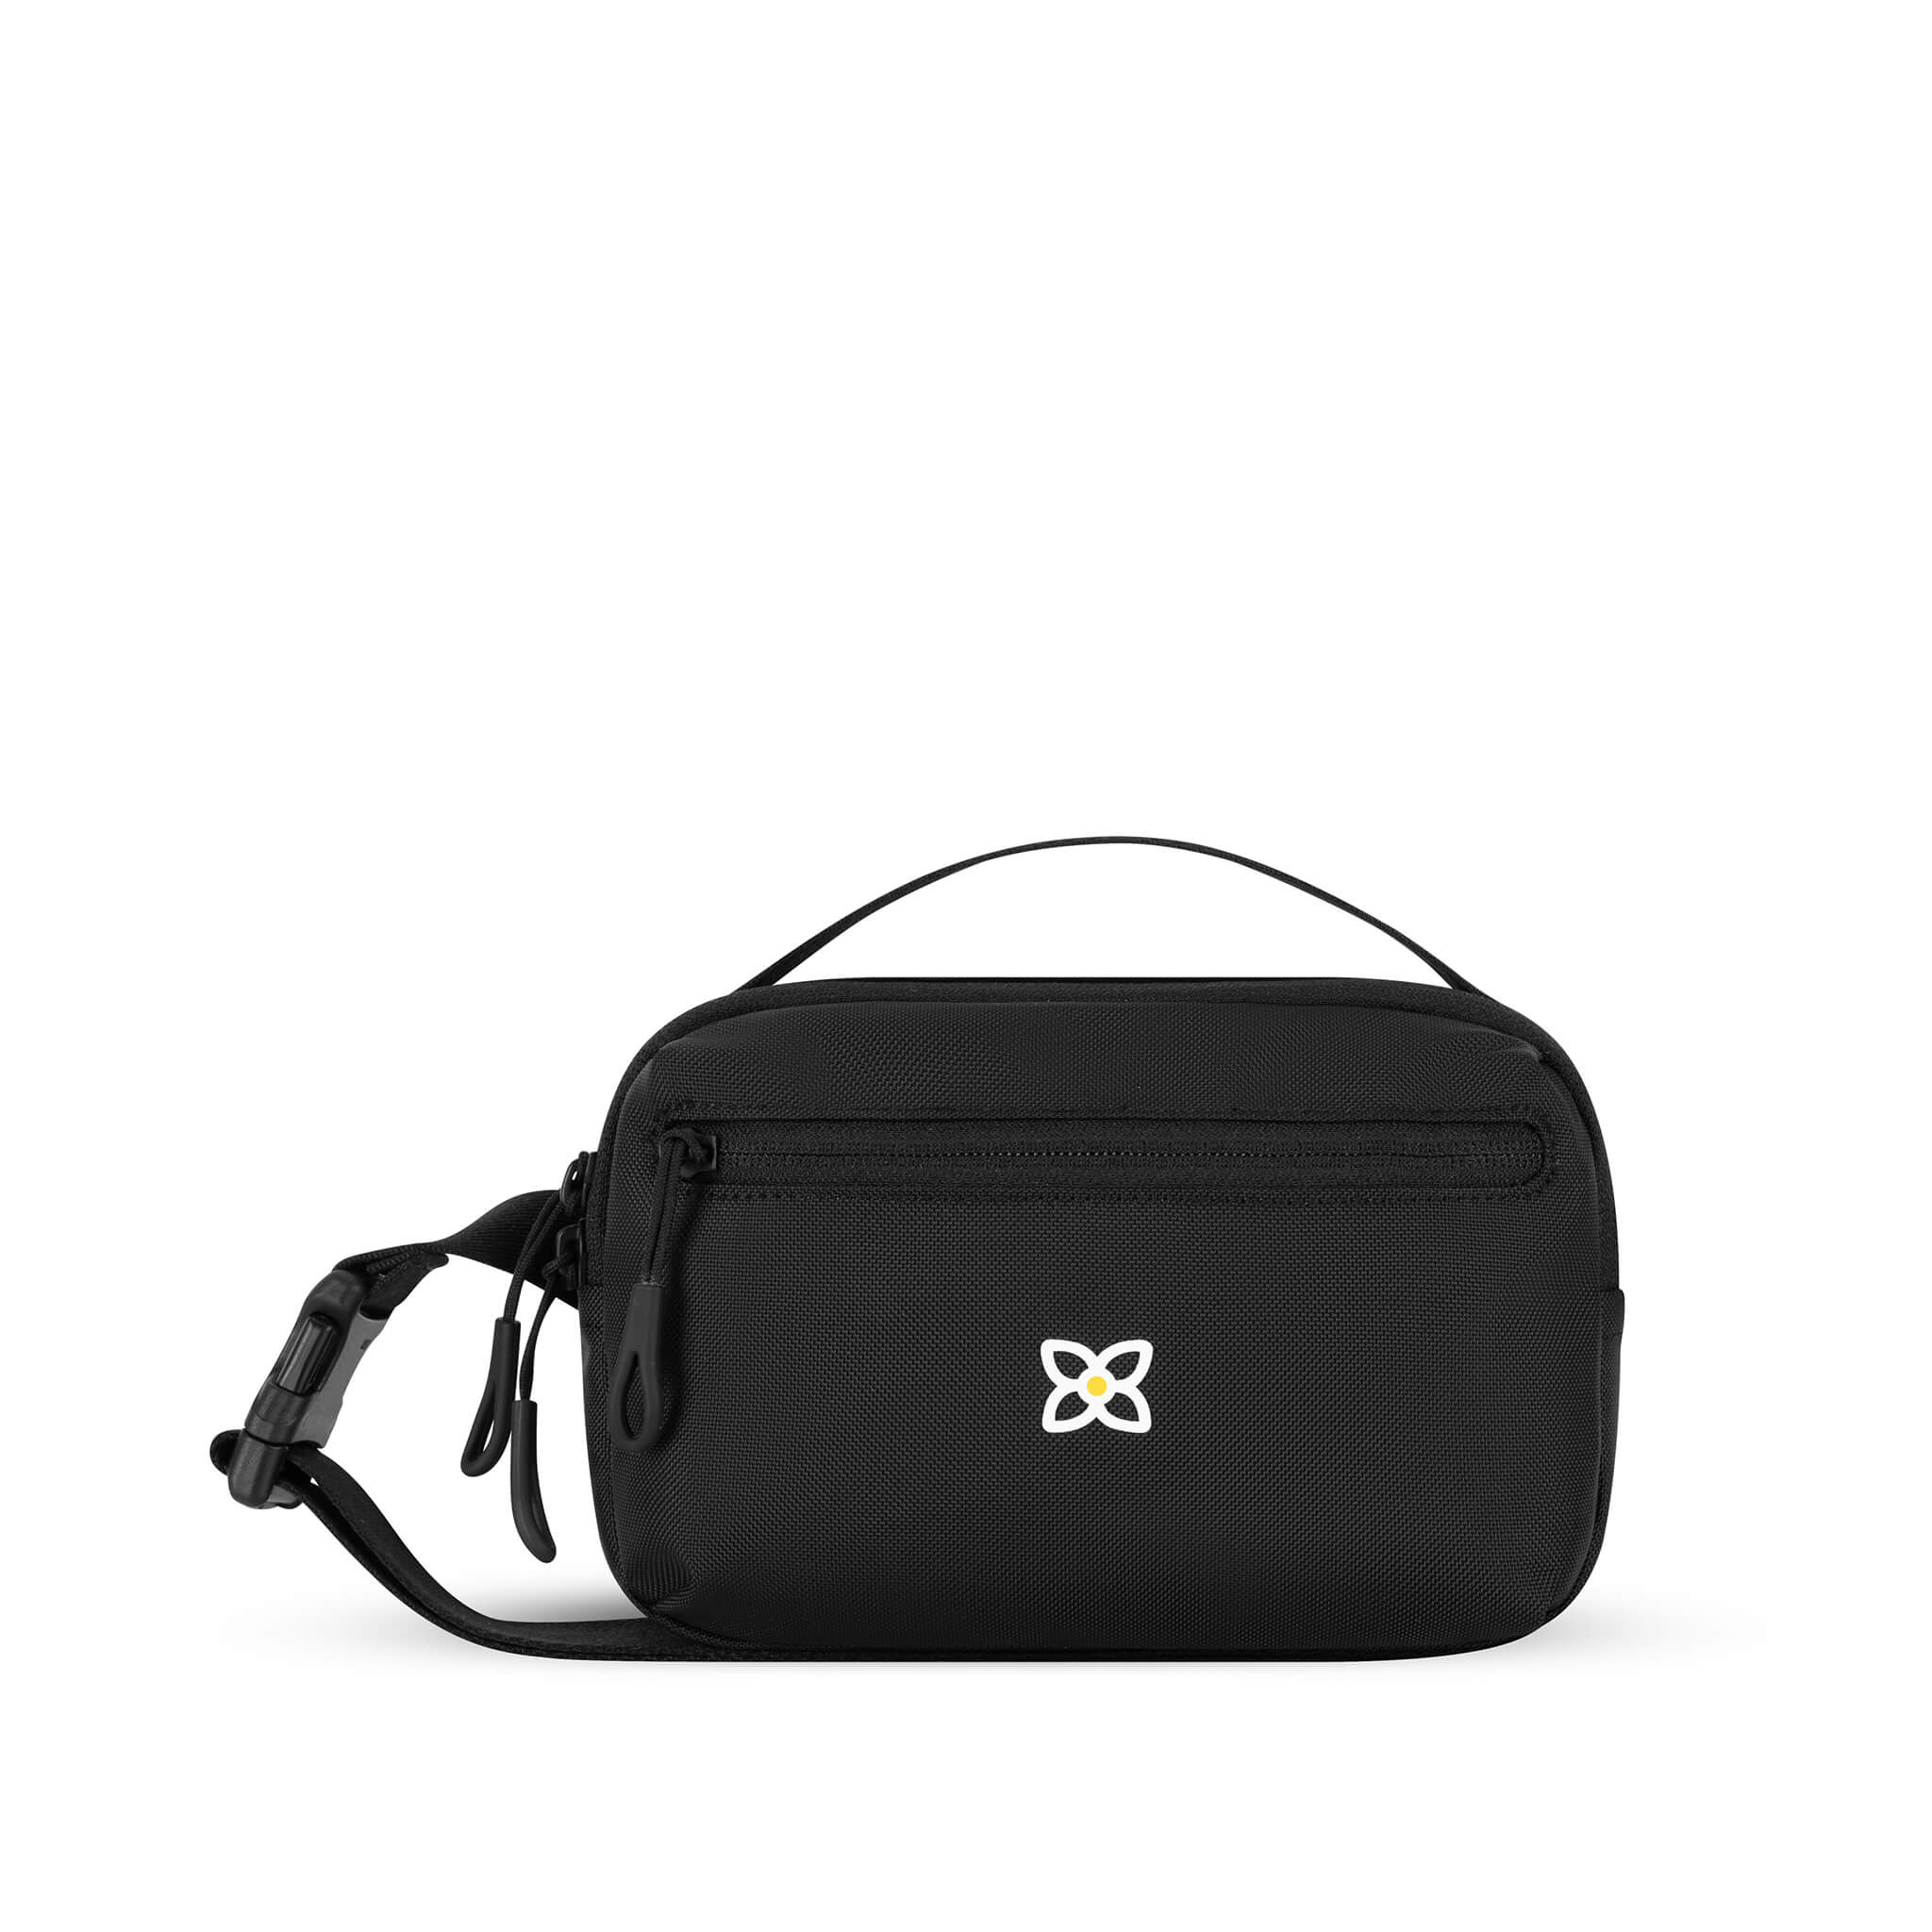 Flat front view of Sherpani’s fanny pack, the Hyk in Raven. The bag is entirely black. There is an external zipper pocket on the front of the bag. Easy-pull zippers are accented in black. The fanny pack features an adjustable strap with a buckle.